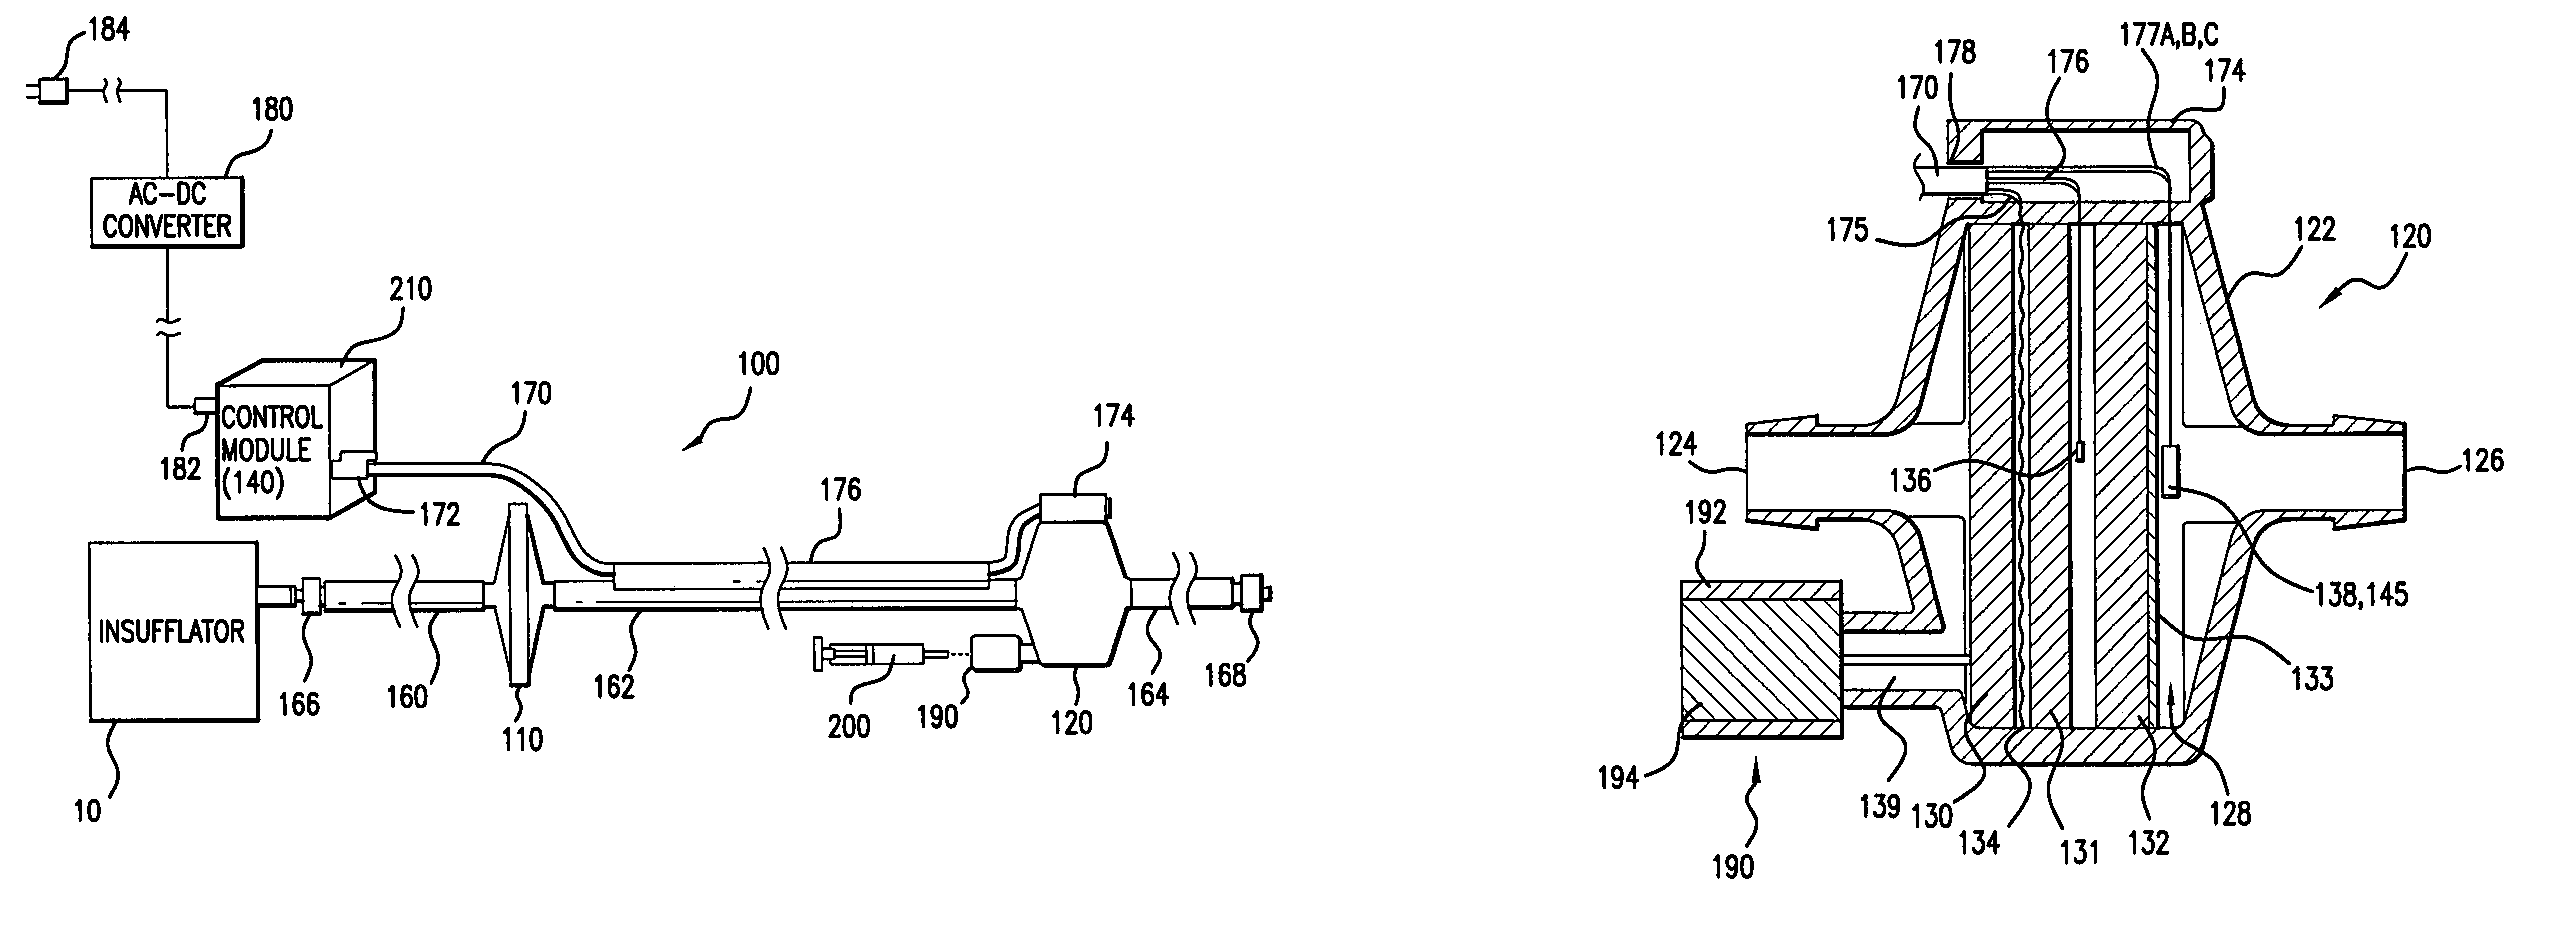 Method and apparatus for conditioning gas for medical procedures having humidity monitoring and recharge alert